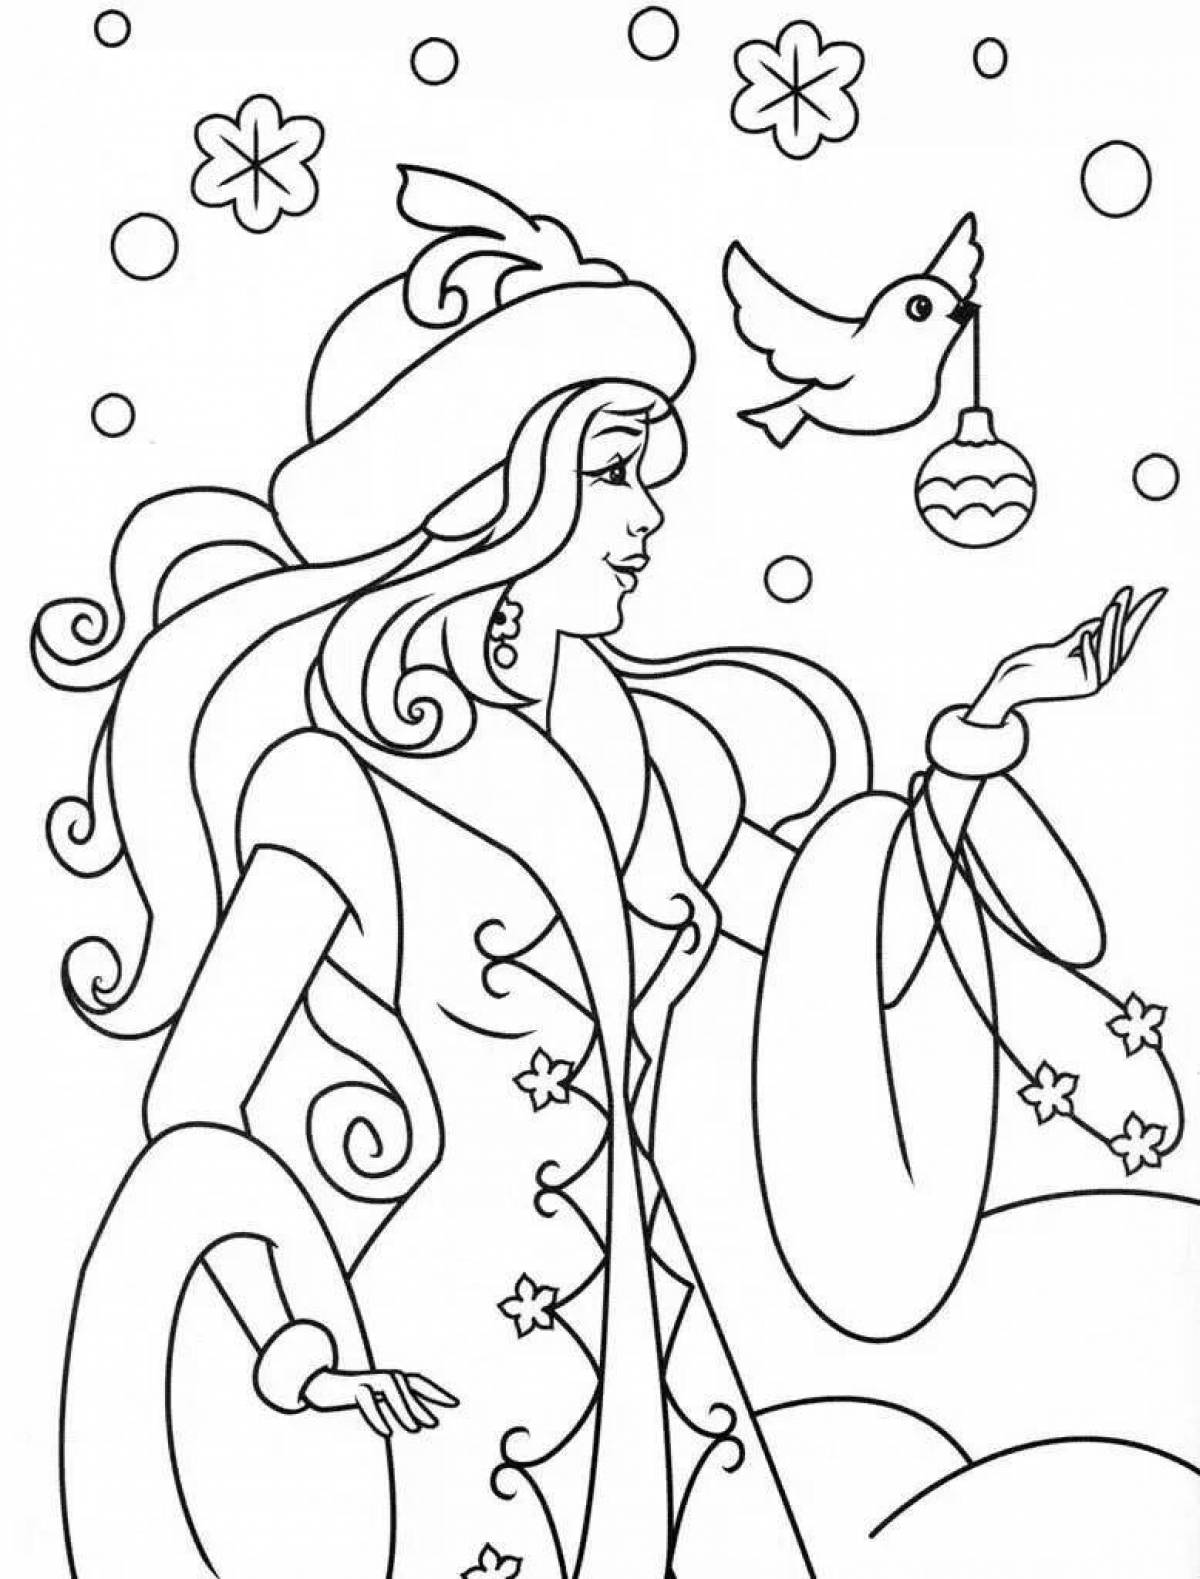 Awesome winter portrait coloring page